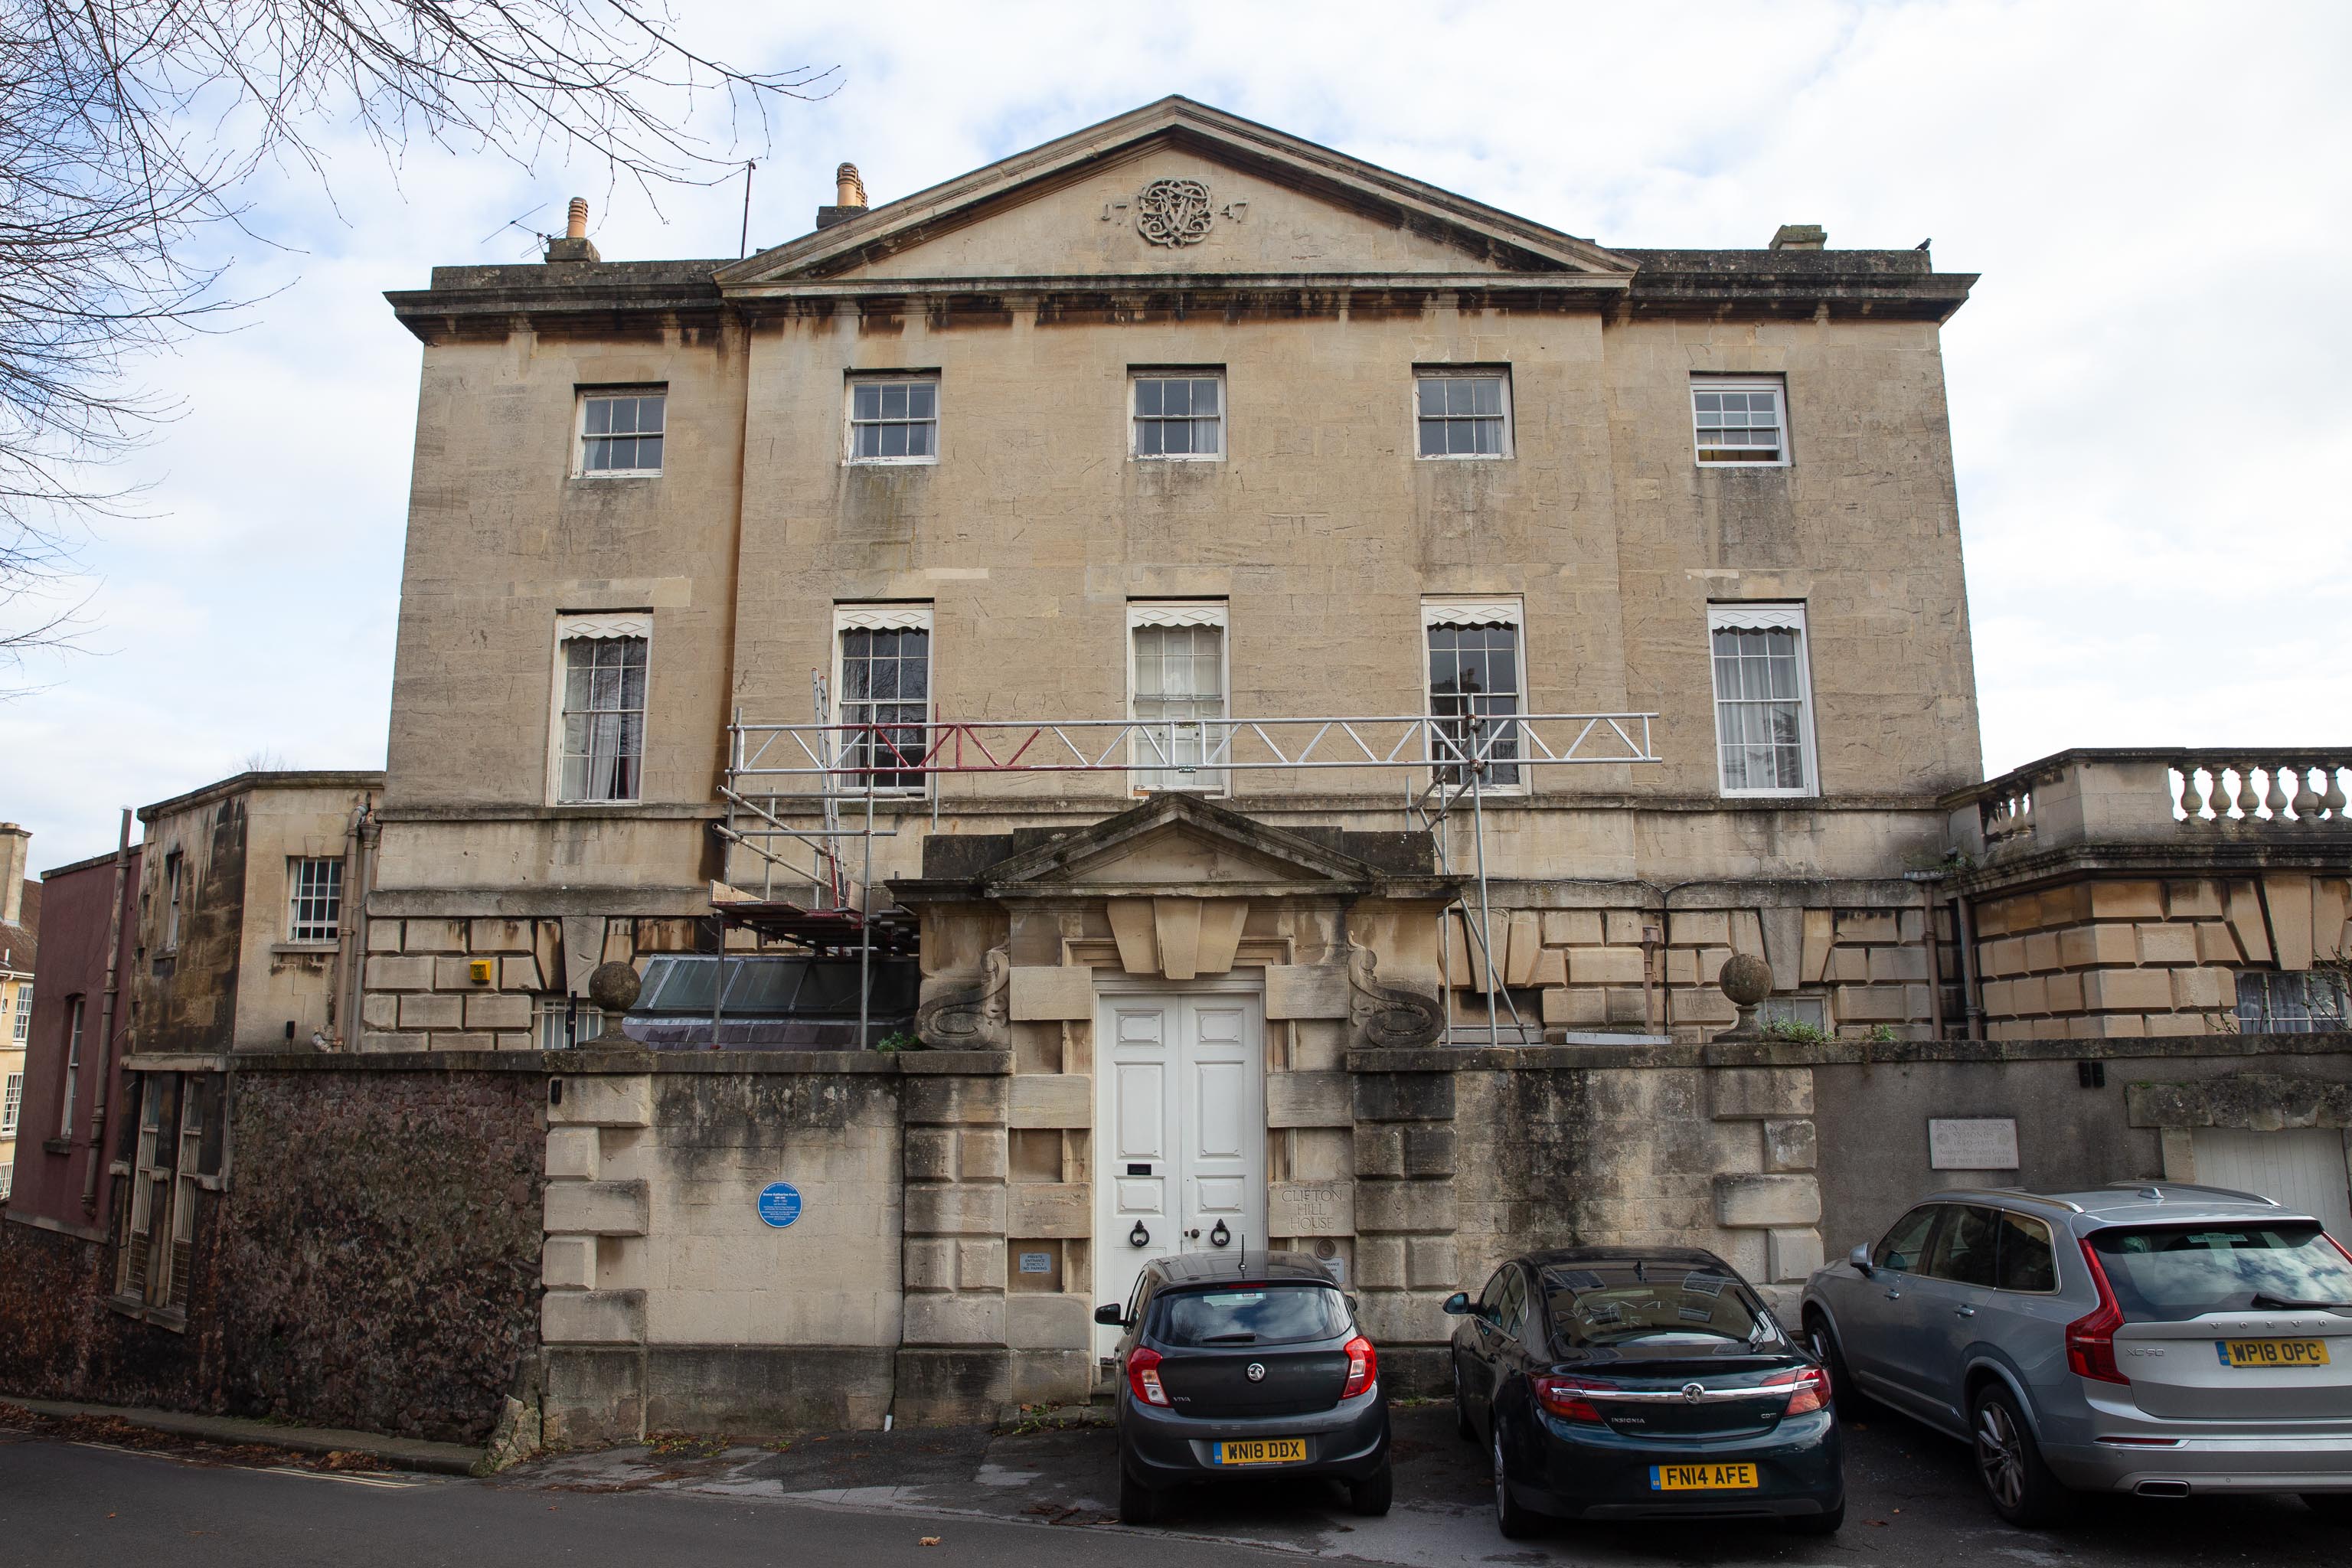 Clifton Hill House
"From 1851 until 1877 it was occupied by the family of John Addington Symonds (1840-93), Bristol’s most important gay historical figure." — OutStor...